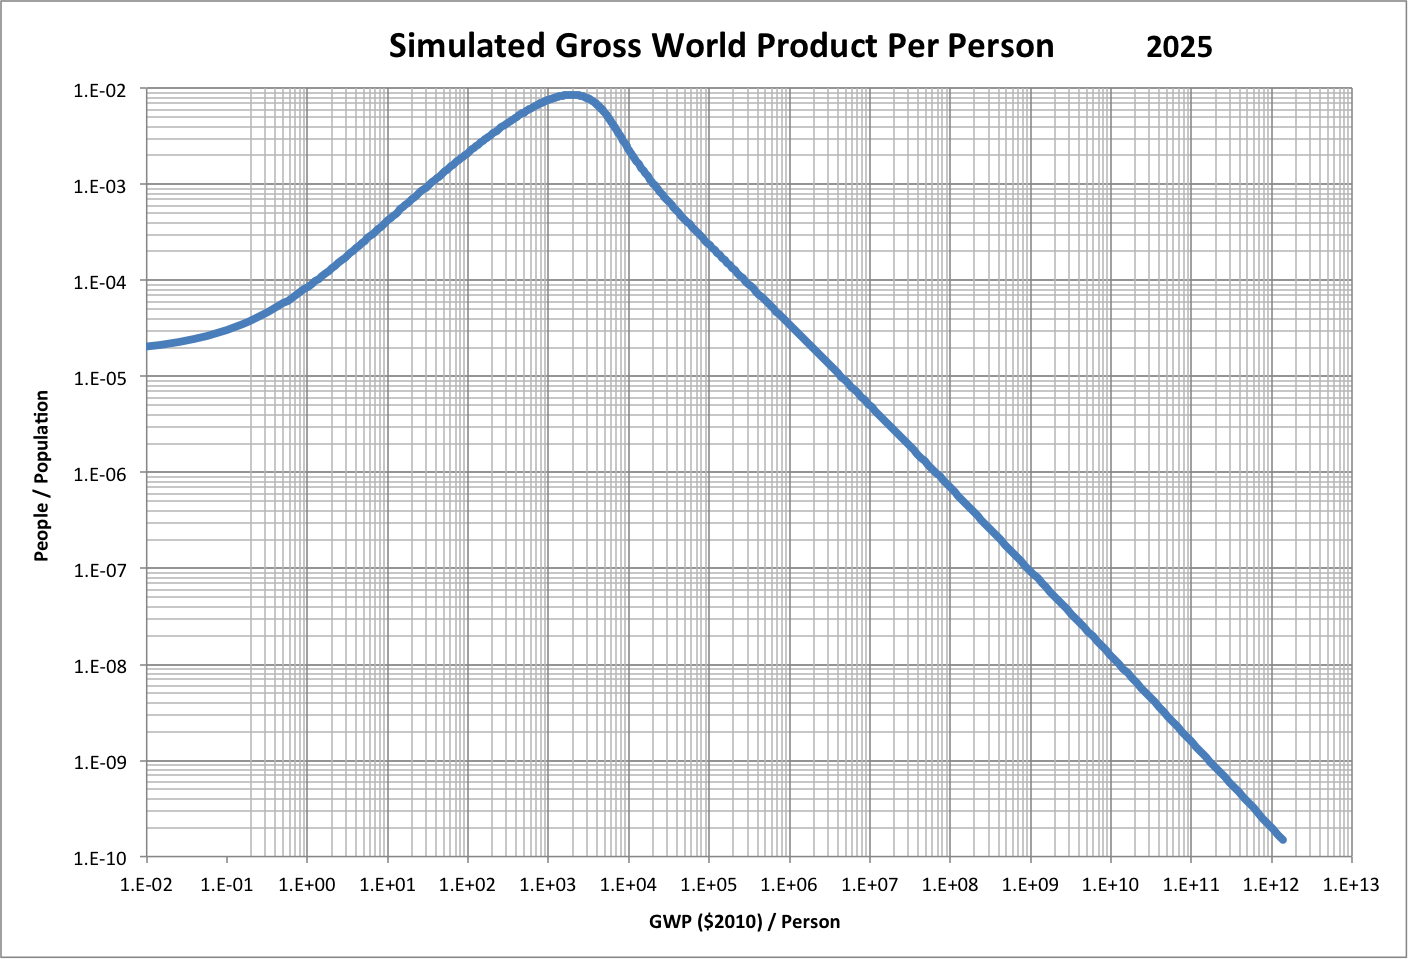 Population Frequency of GWP/person